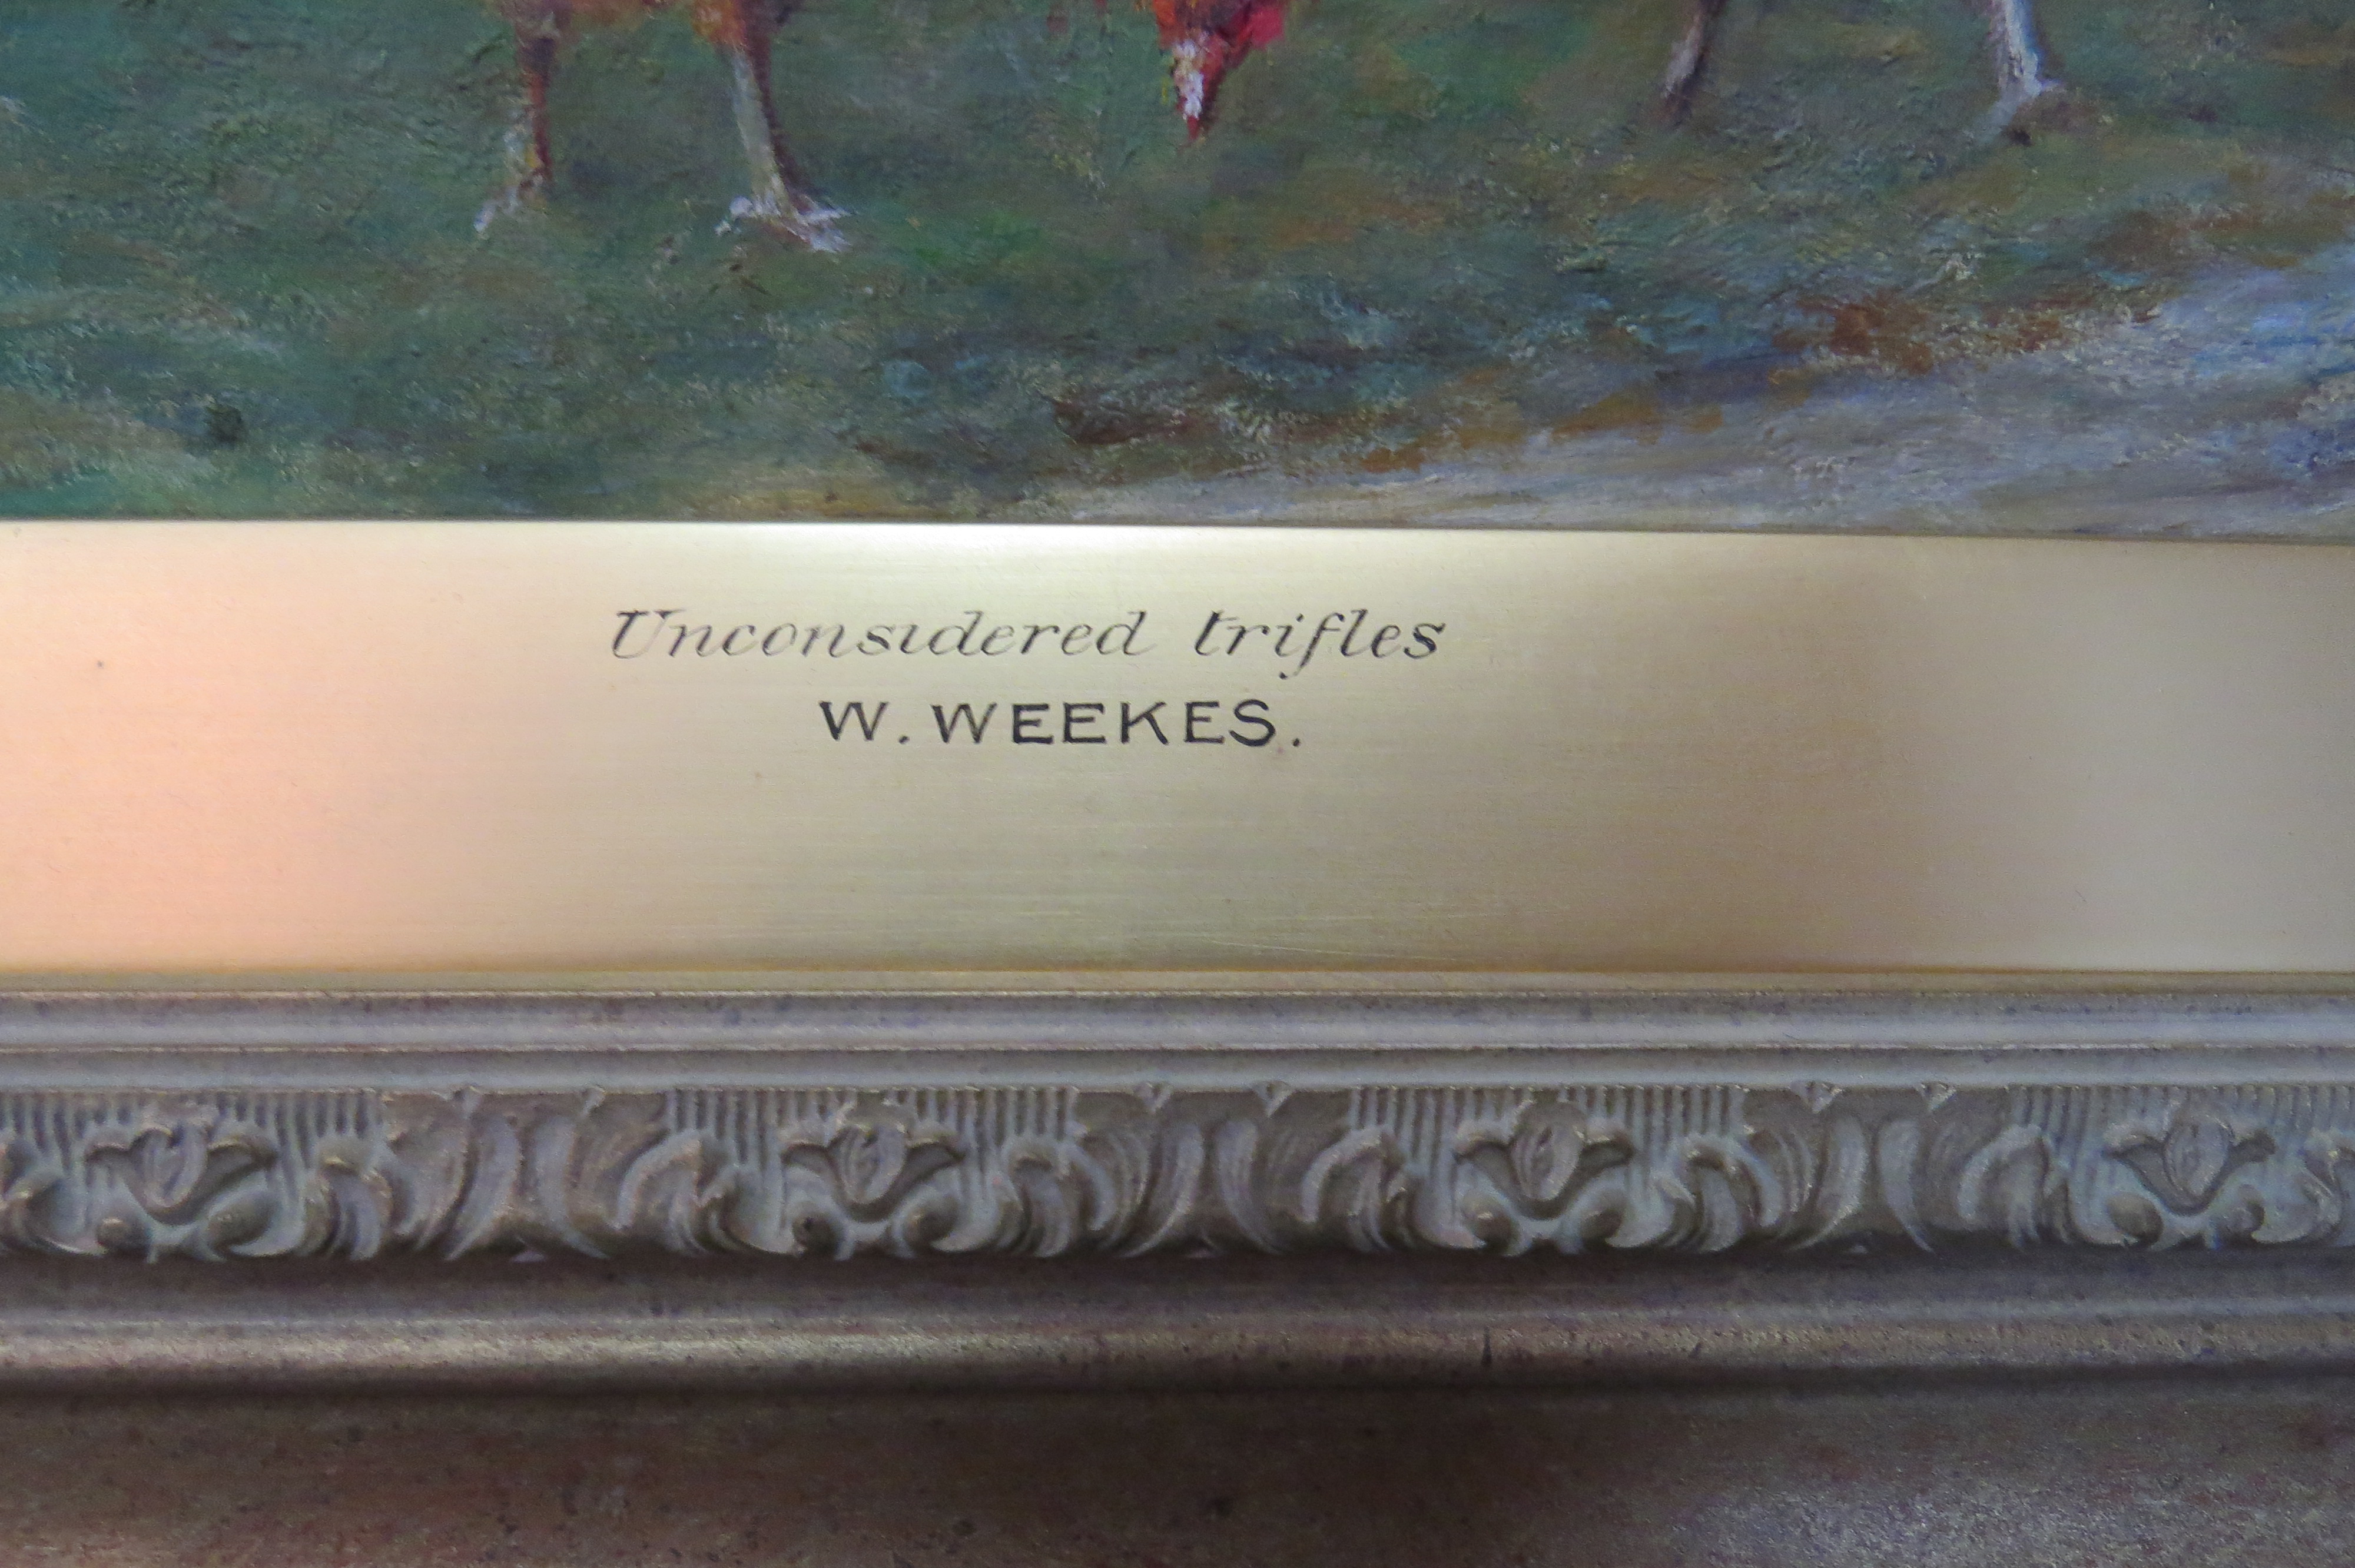 Oil on Canvas of “Unconsidered Trifles” by W. Weekes